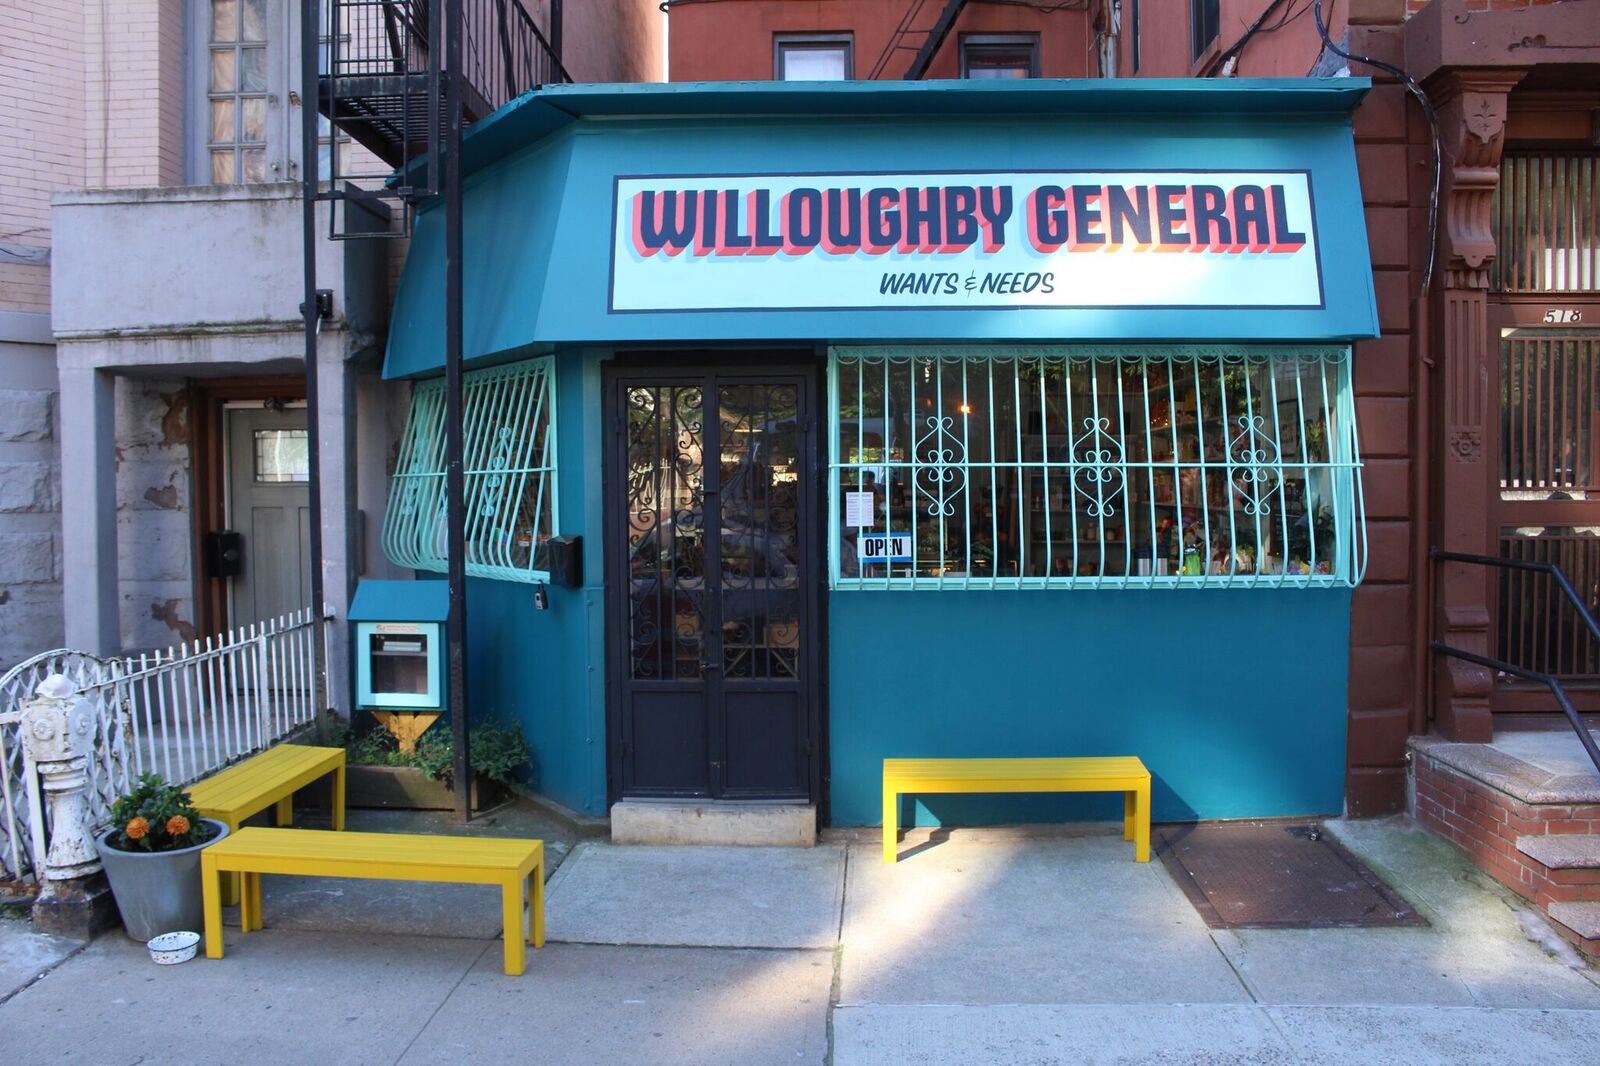 Willoughby General